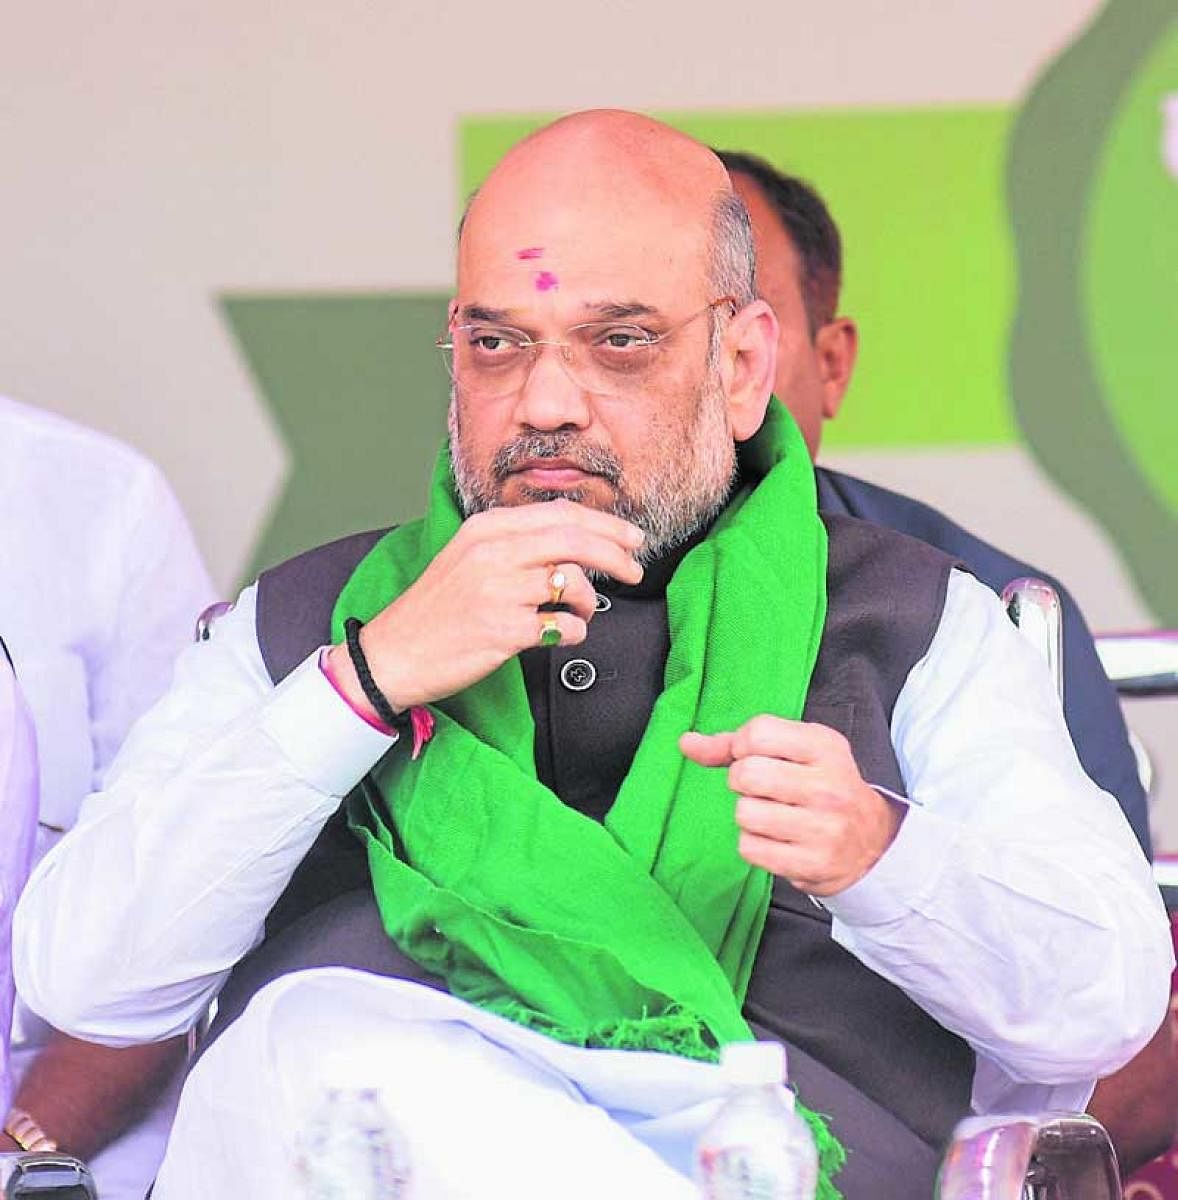 BJP National President Amit Shah at a convention held recently. DH Photo.